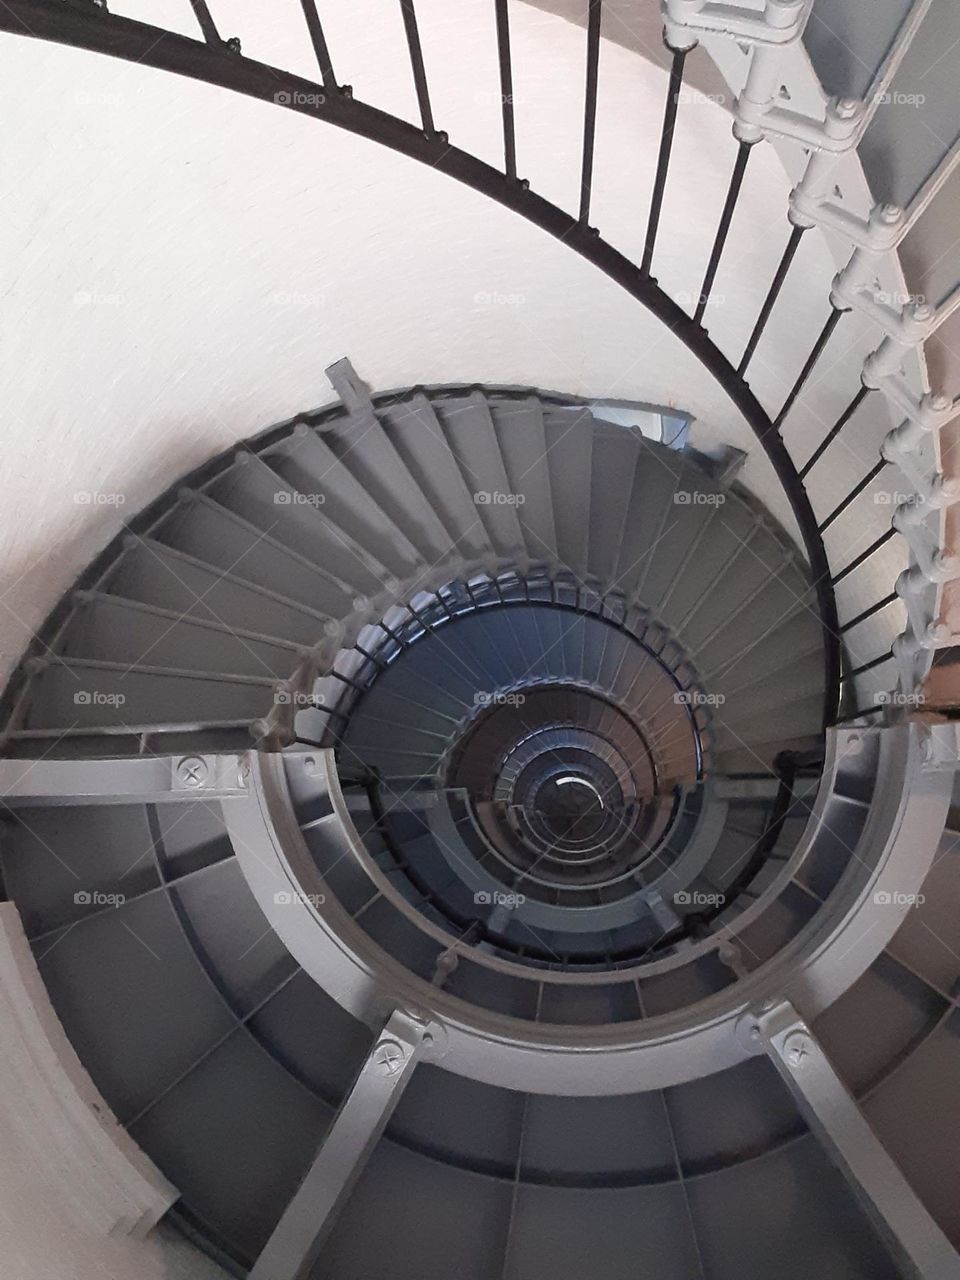 A photo of the interior of the Ponce Inlet Lighthouse spiral staircase taken from below.